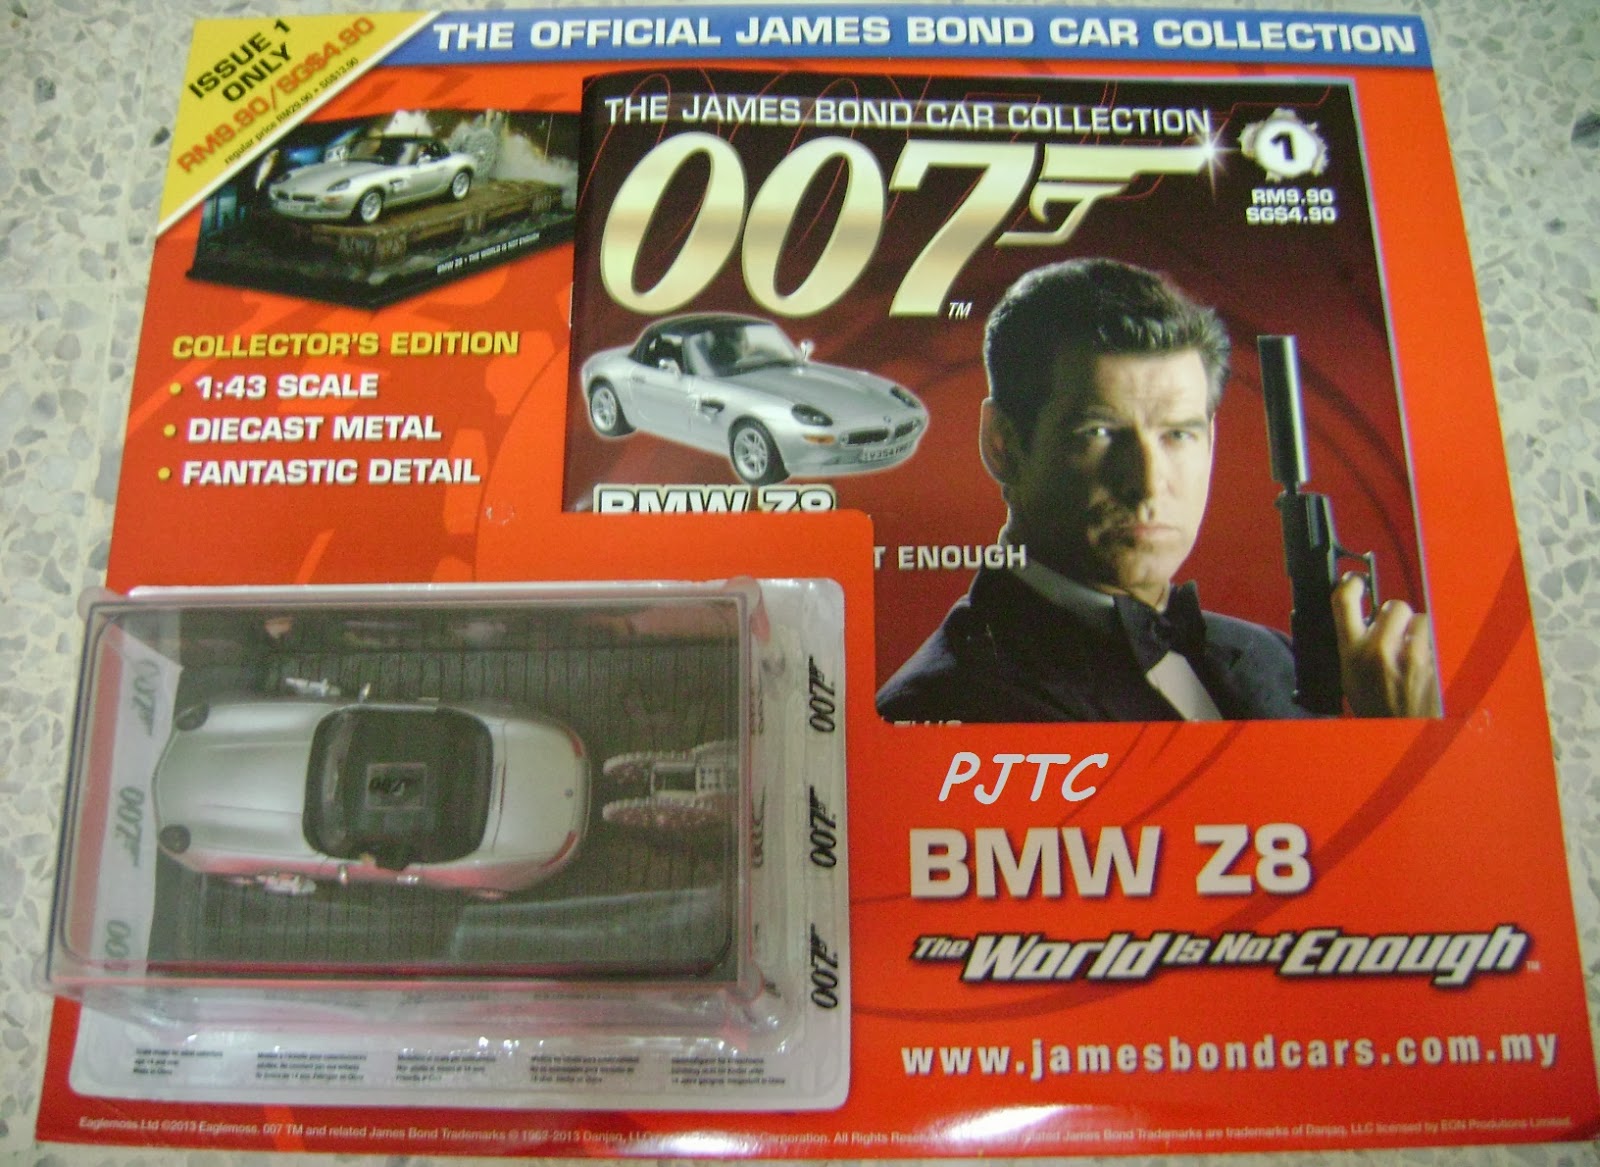 PJ Toy Car: THE JAMES BOND CAR COLLECTION from EAGLEMOSS